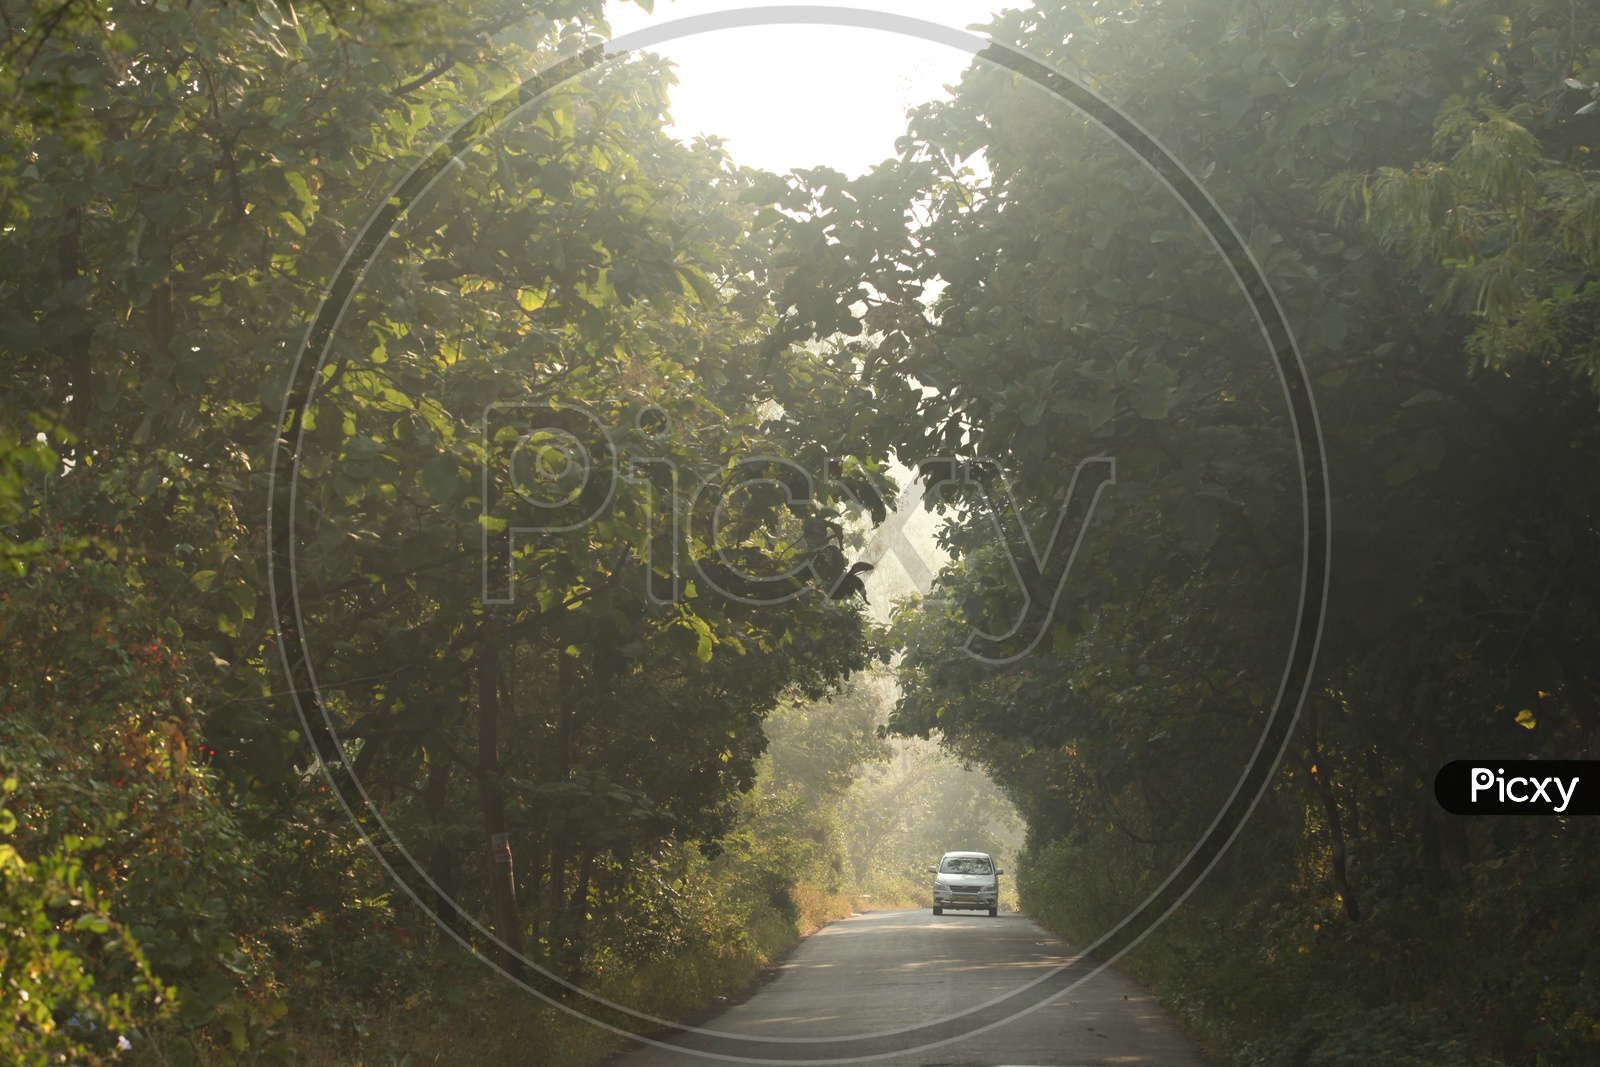 A Car On a Rural Village Roads Covered With Trees